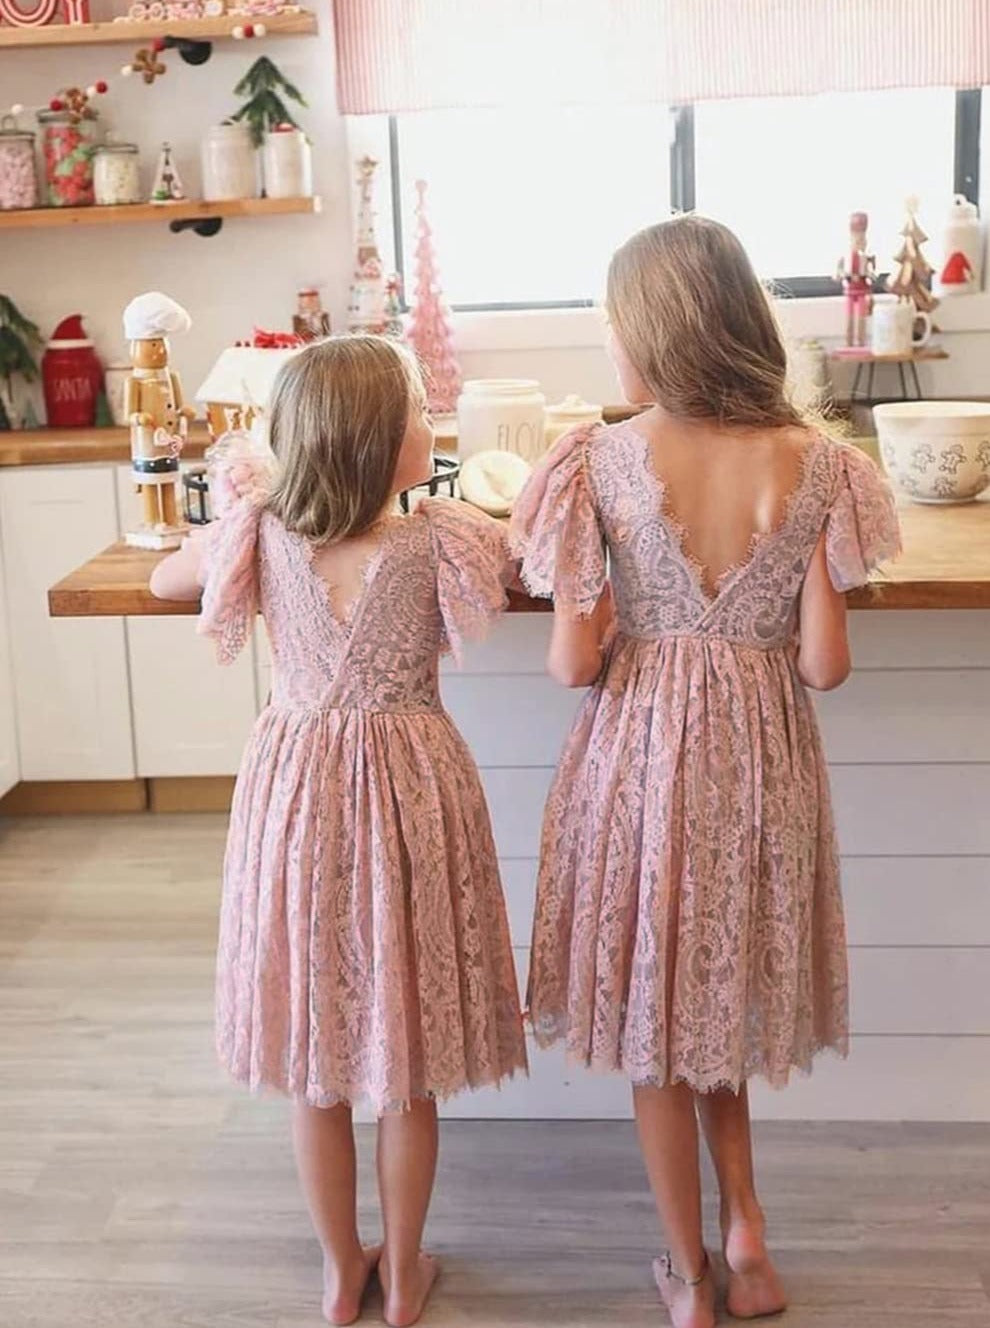 2Bunnies Flower Girl Dress Paisley Lace Back A-Line Flutter Sleeve Straight All Lace Knee (Dusty Pink) - 2BUNNIES